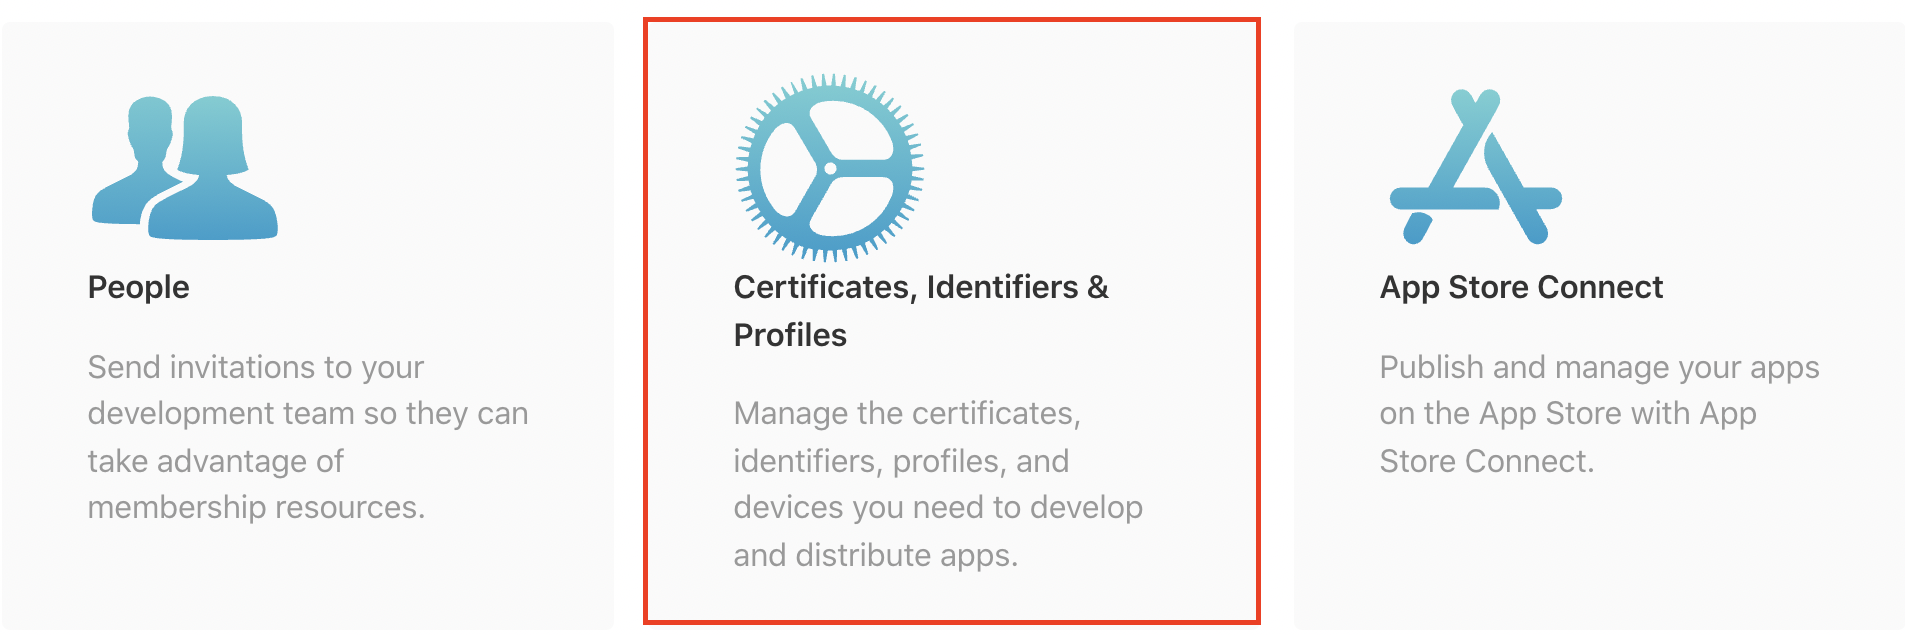 ../../_images/Certificates_Identifiers_Profiles.png